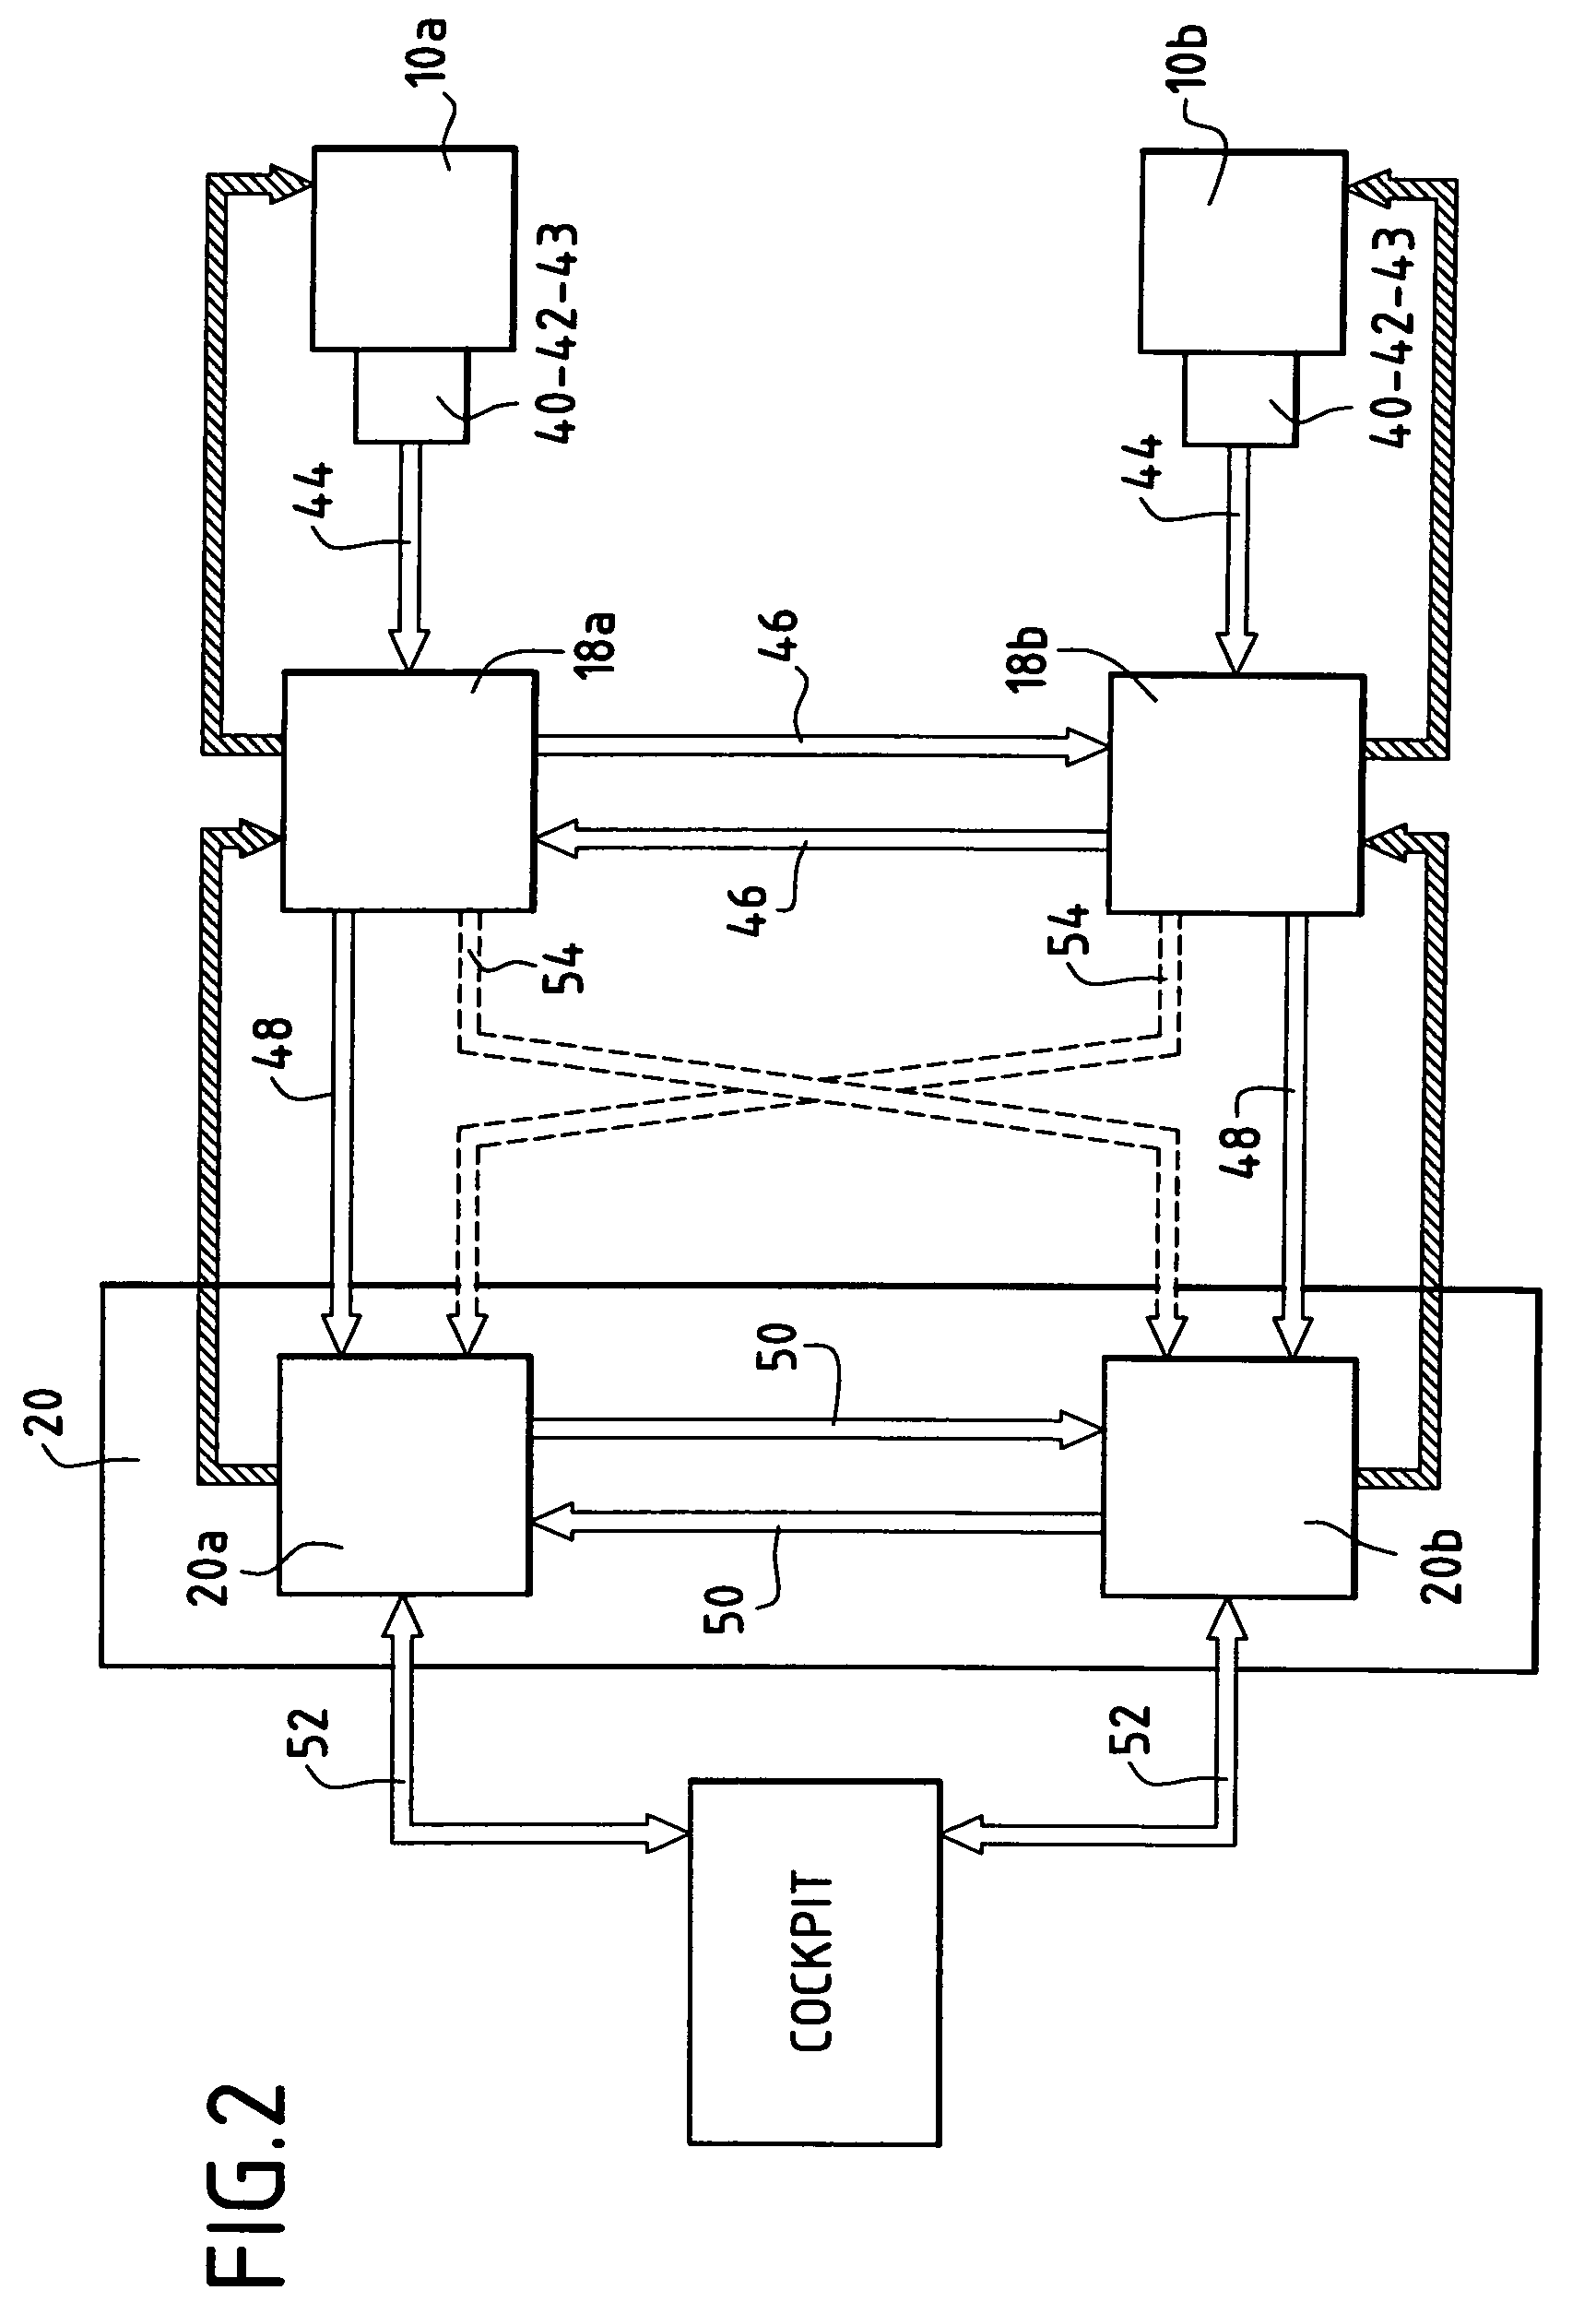 Electromechanical turbojet thrust reverser with continuous position control